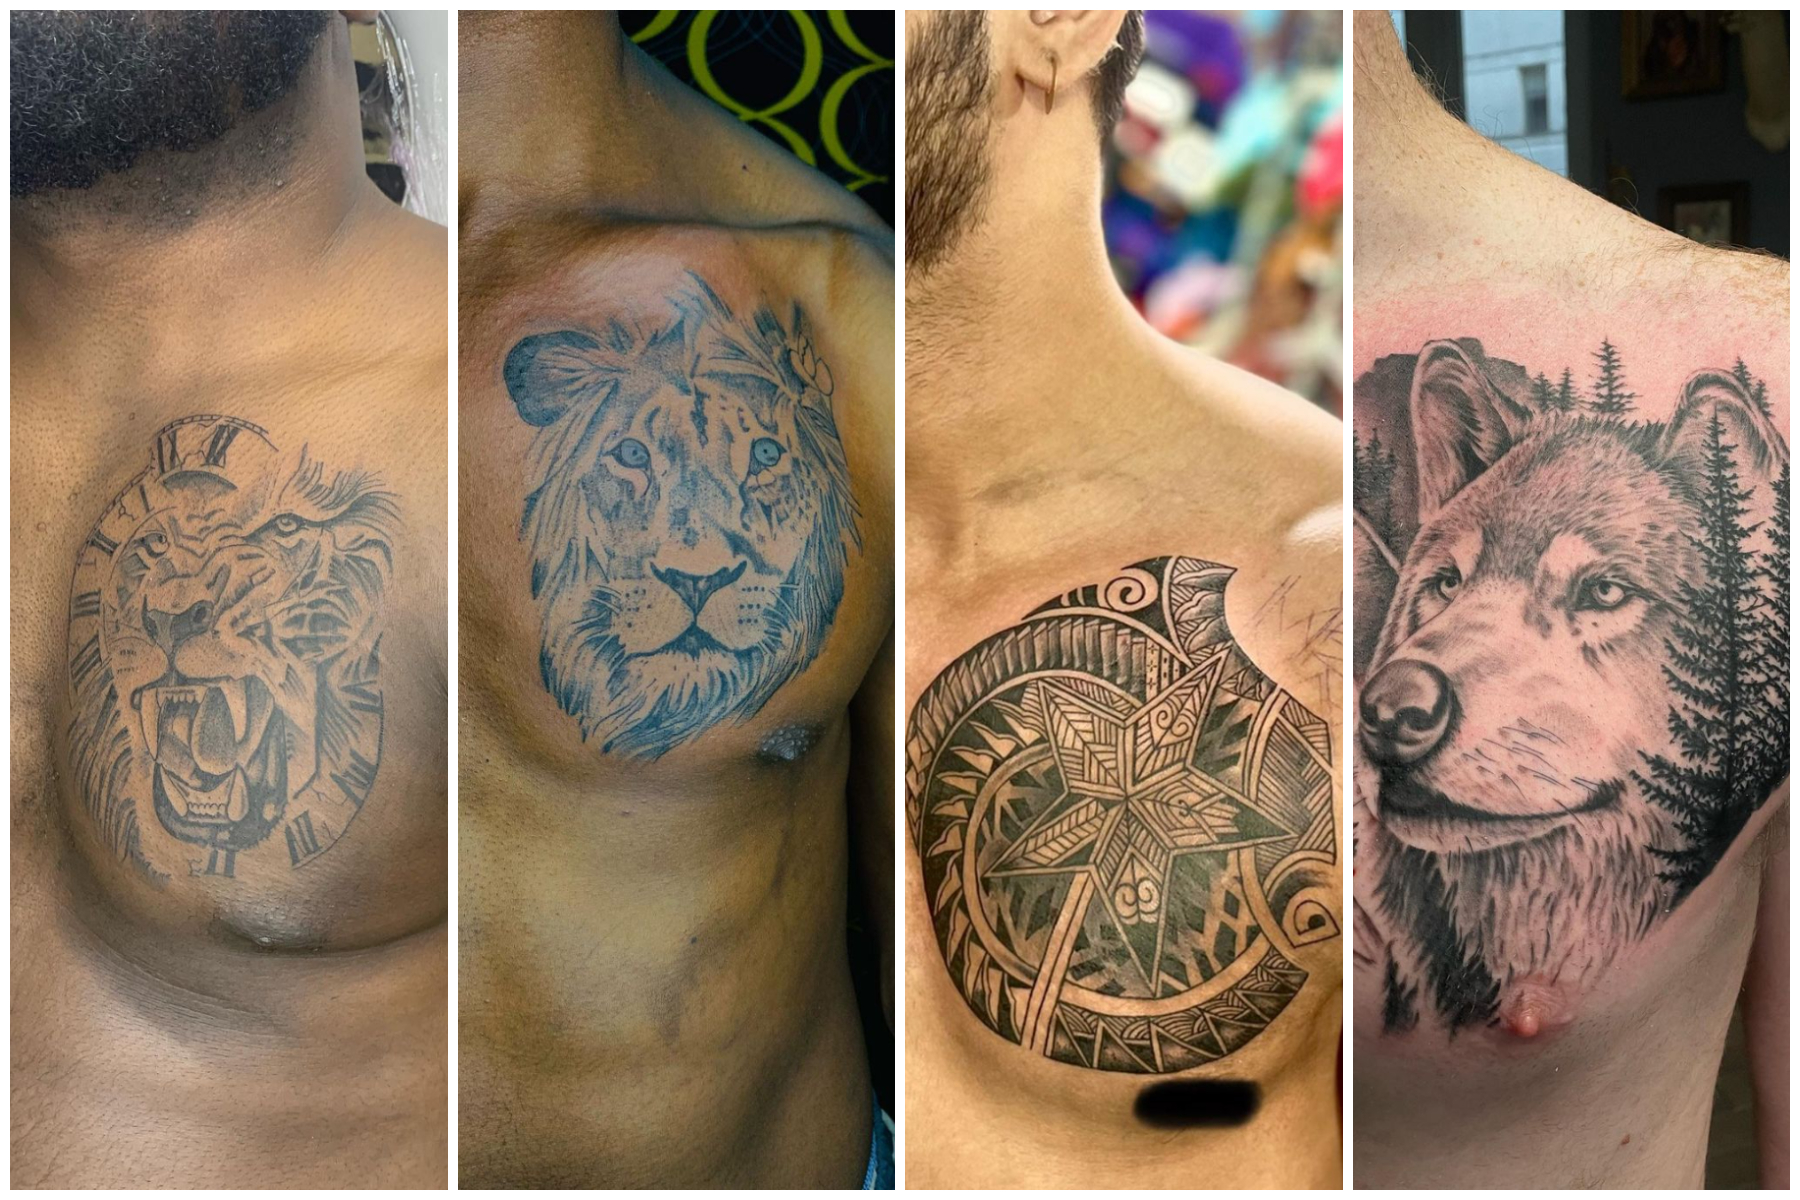 20 of the best chest tattoos for men and their meanings (with photos)